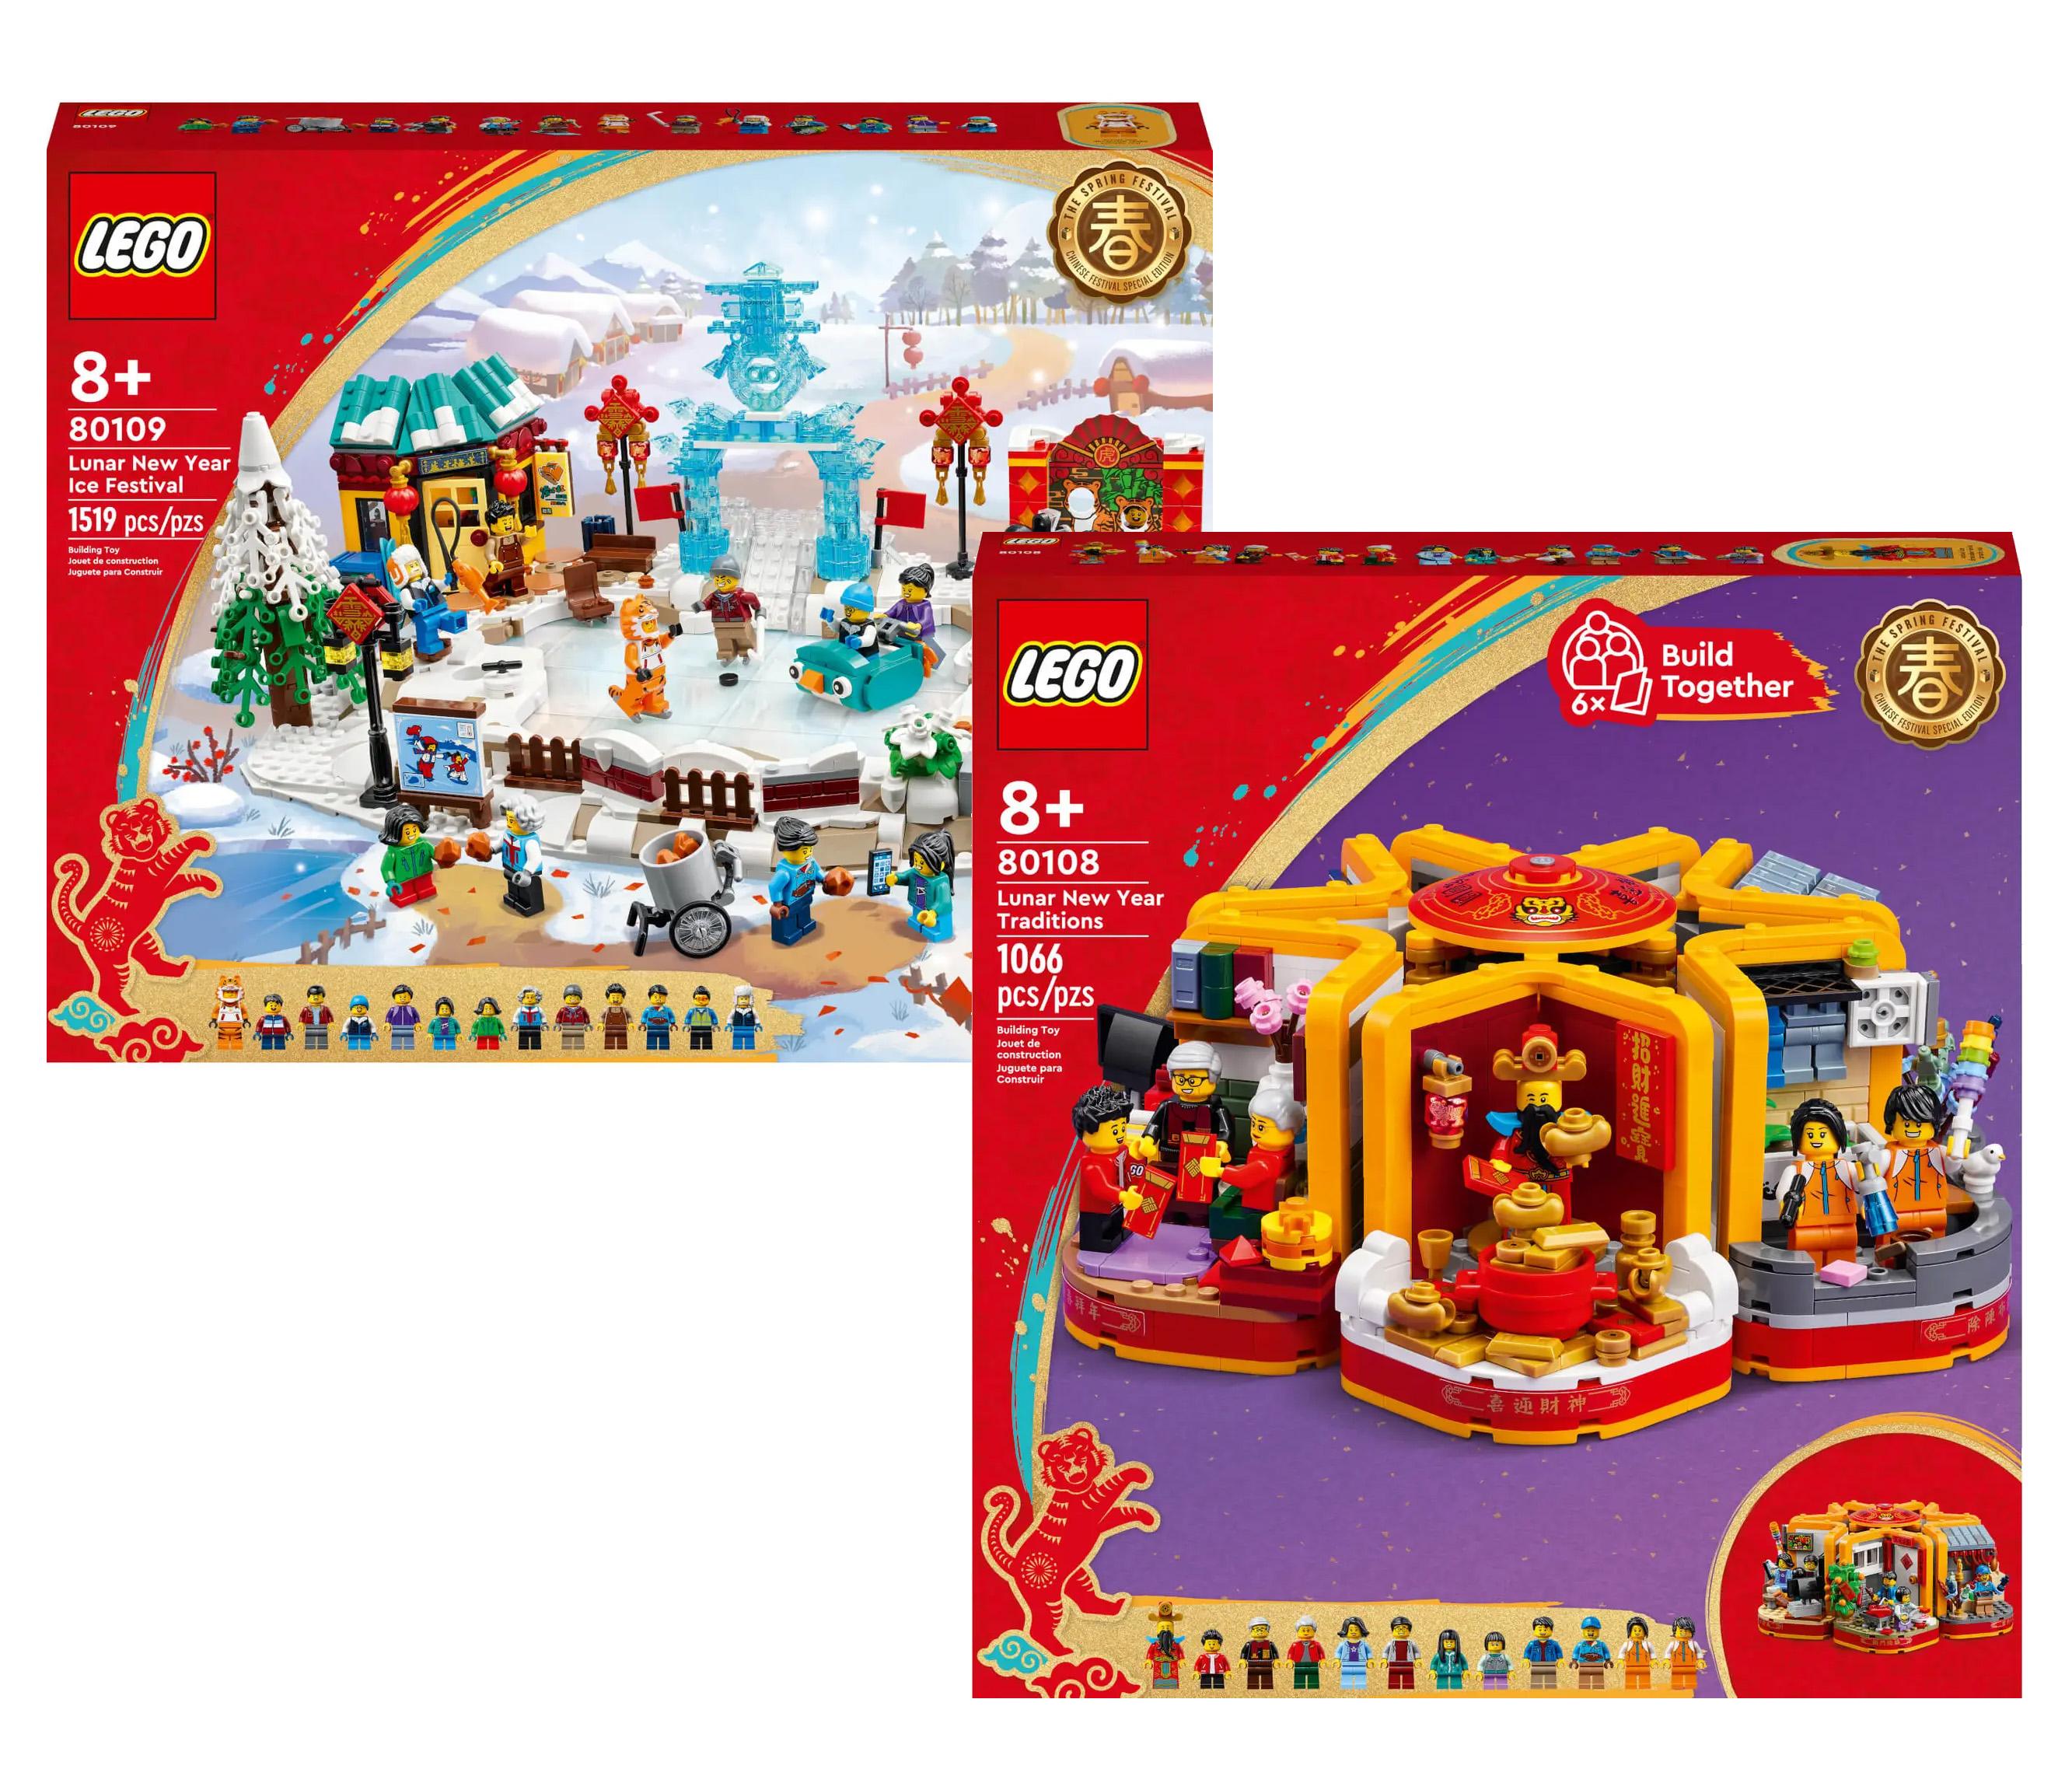 Lego Chinese Festival Lunar New Year 2 Set for $169.99 Shipped